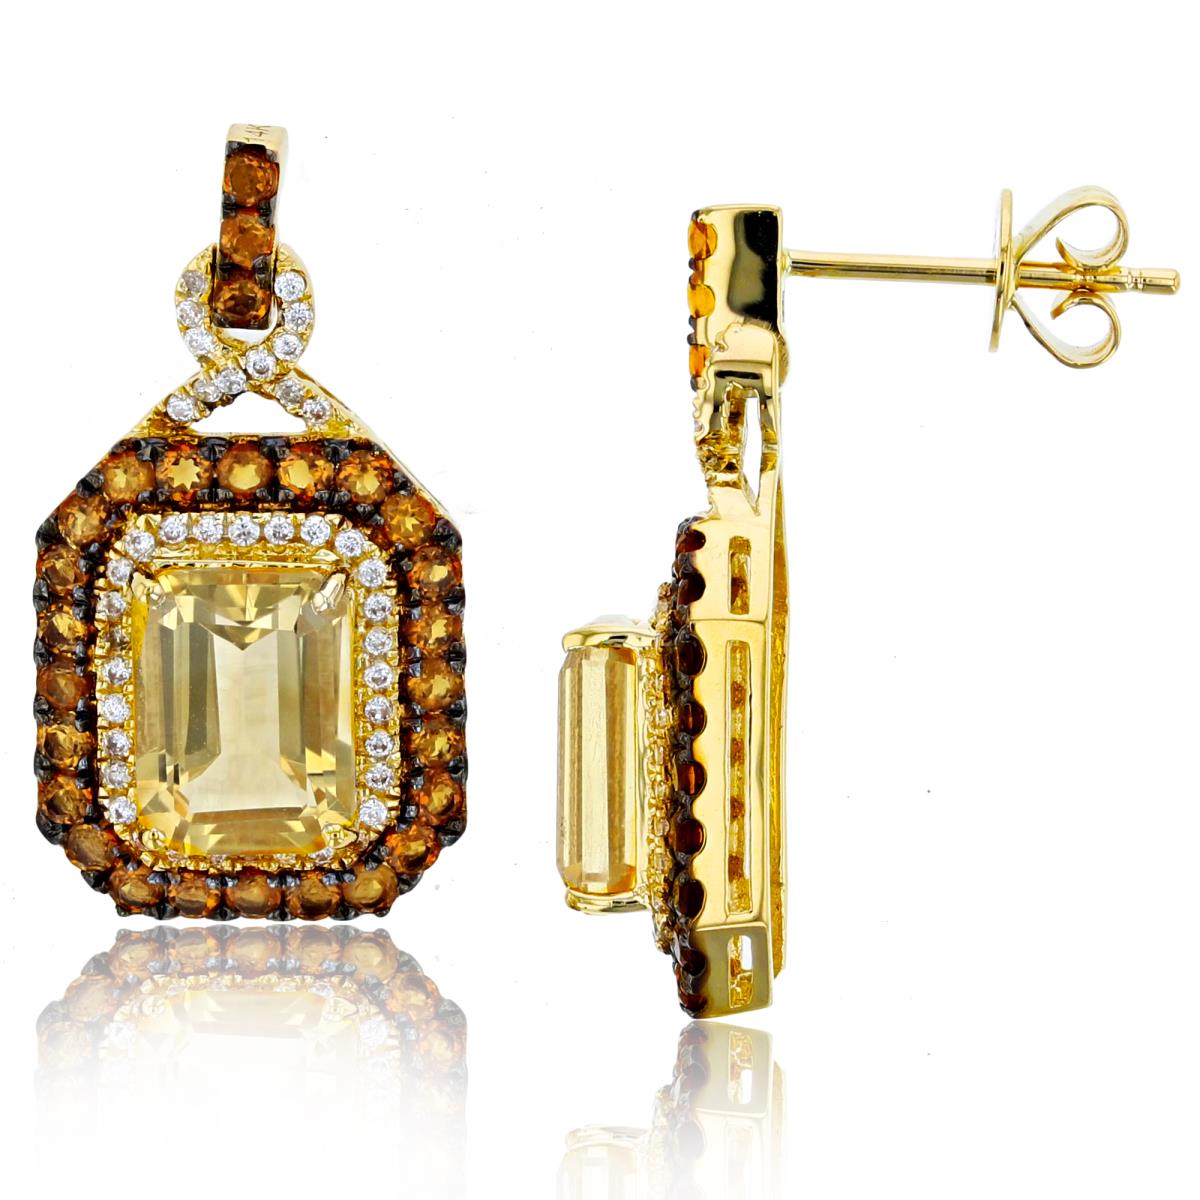 10K Yellow Gold 8x6mm Oct Citrine/1.5mm Madeira Citrine Invert & 0.22 CTTW Diamond Earring with Silicone Back 